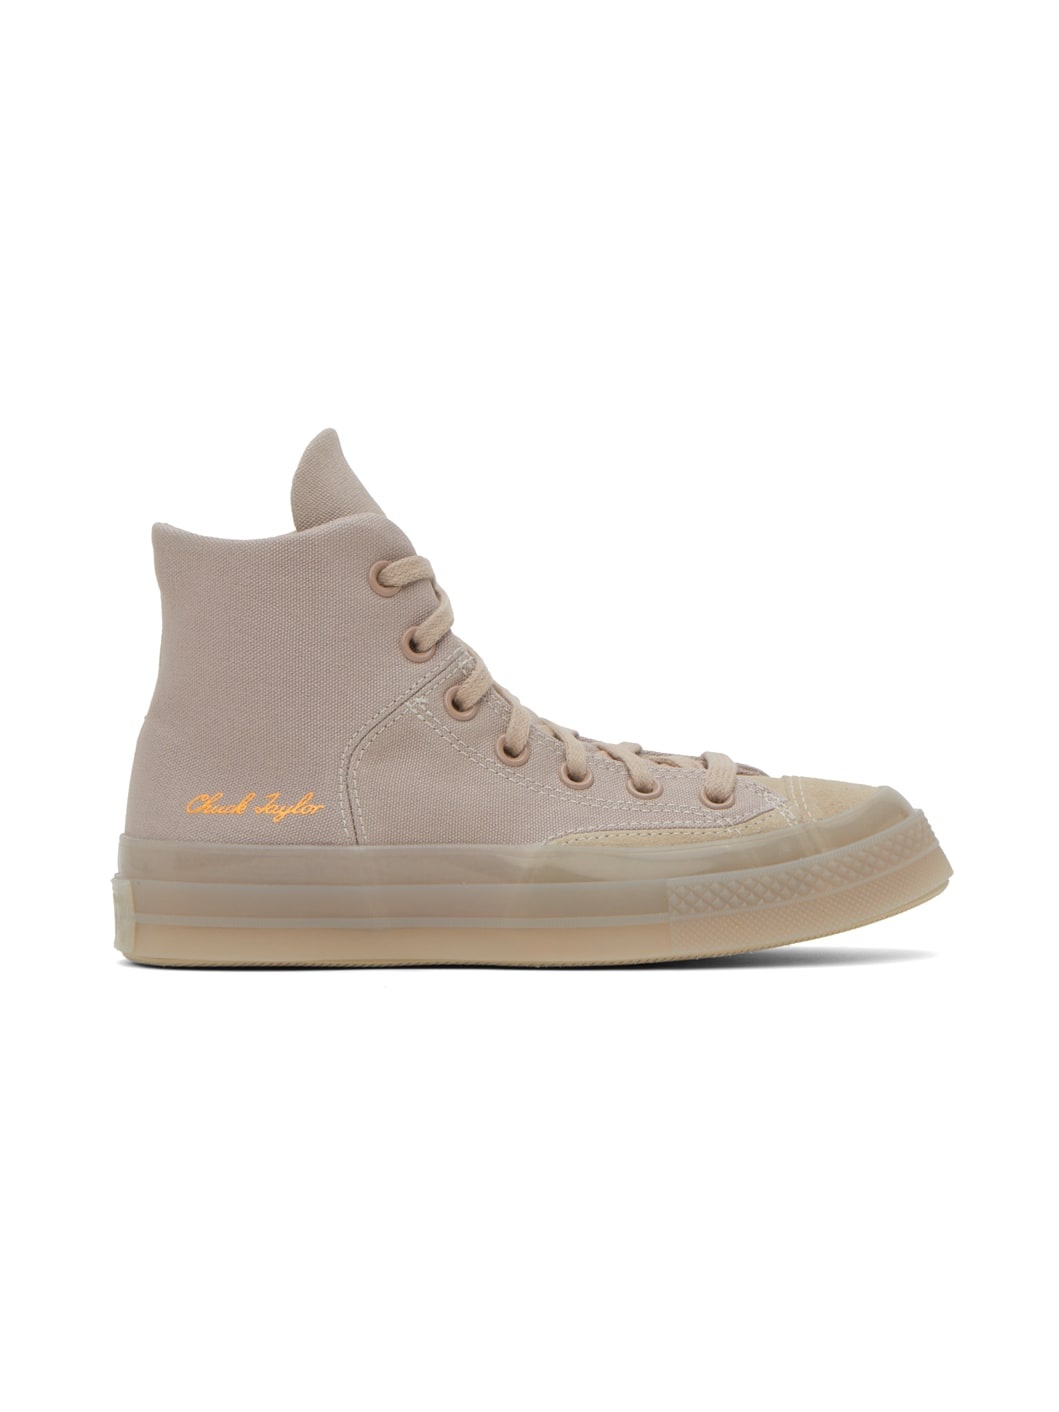 Gray Chuck 70 Marquis High Sneakers - 1